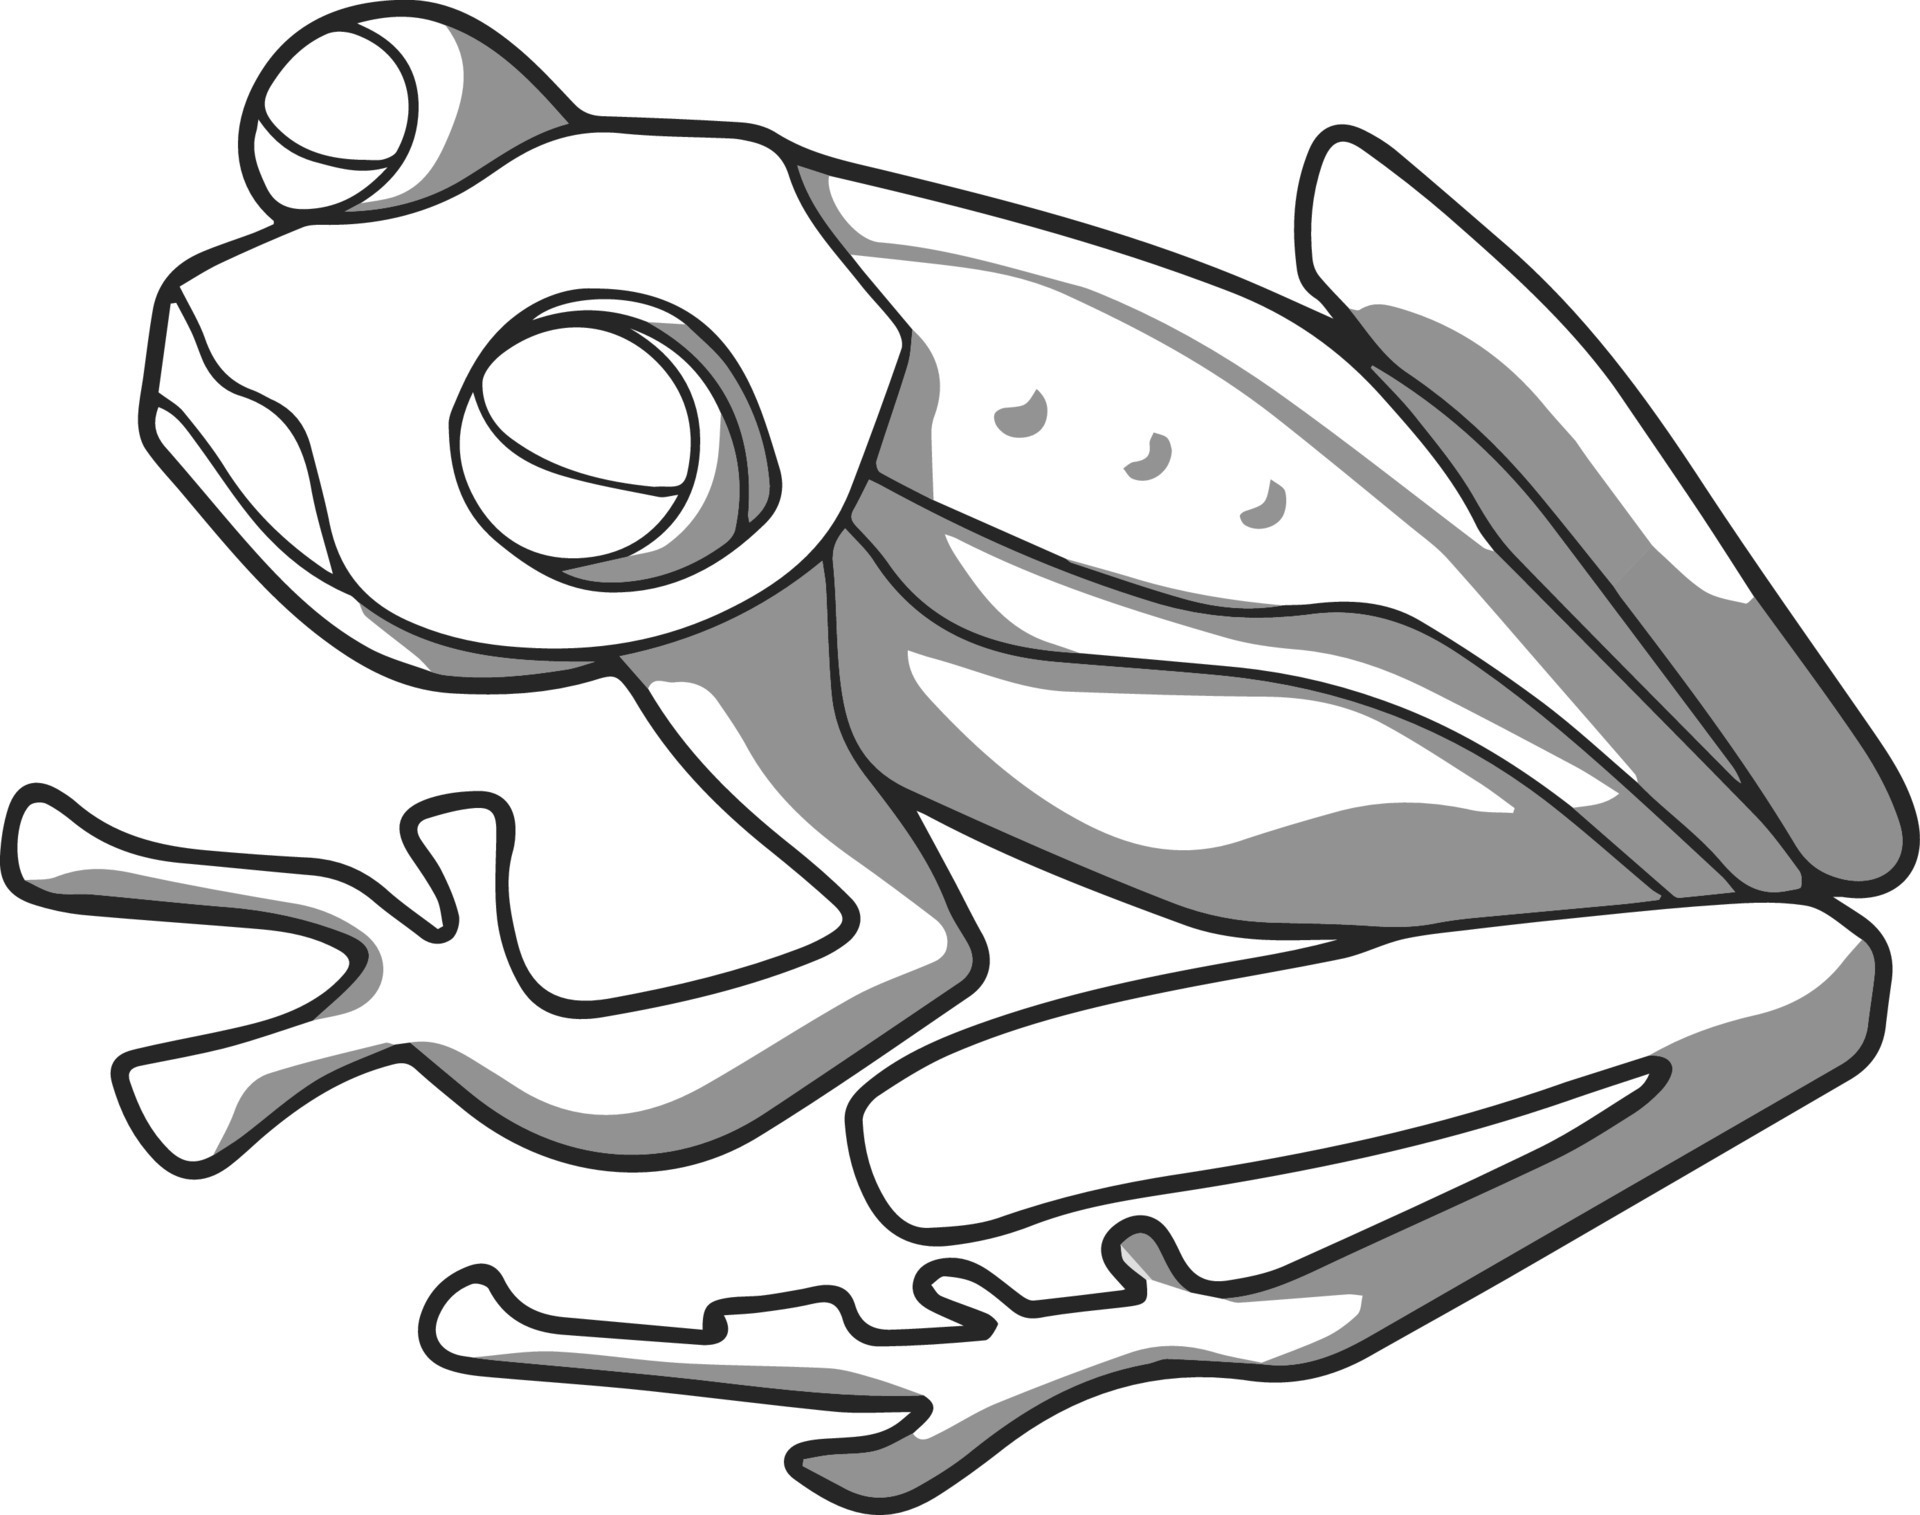 Learn How To Draw A Frog StepbyStep Guide